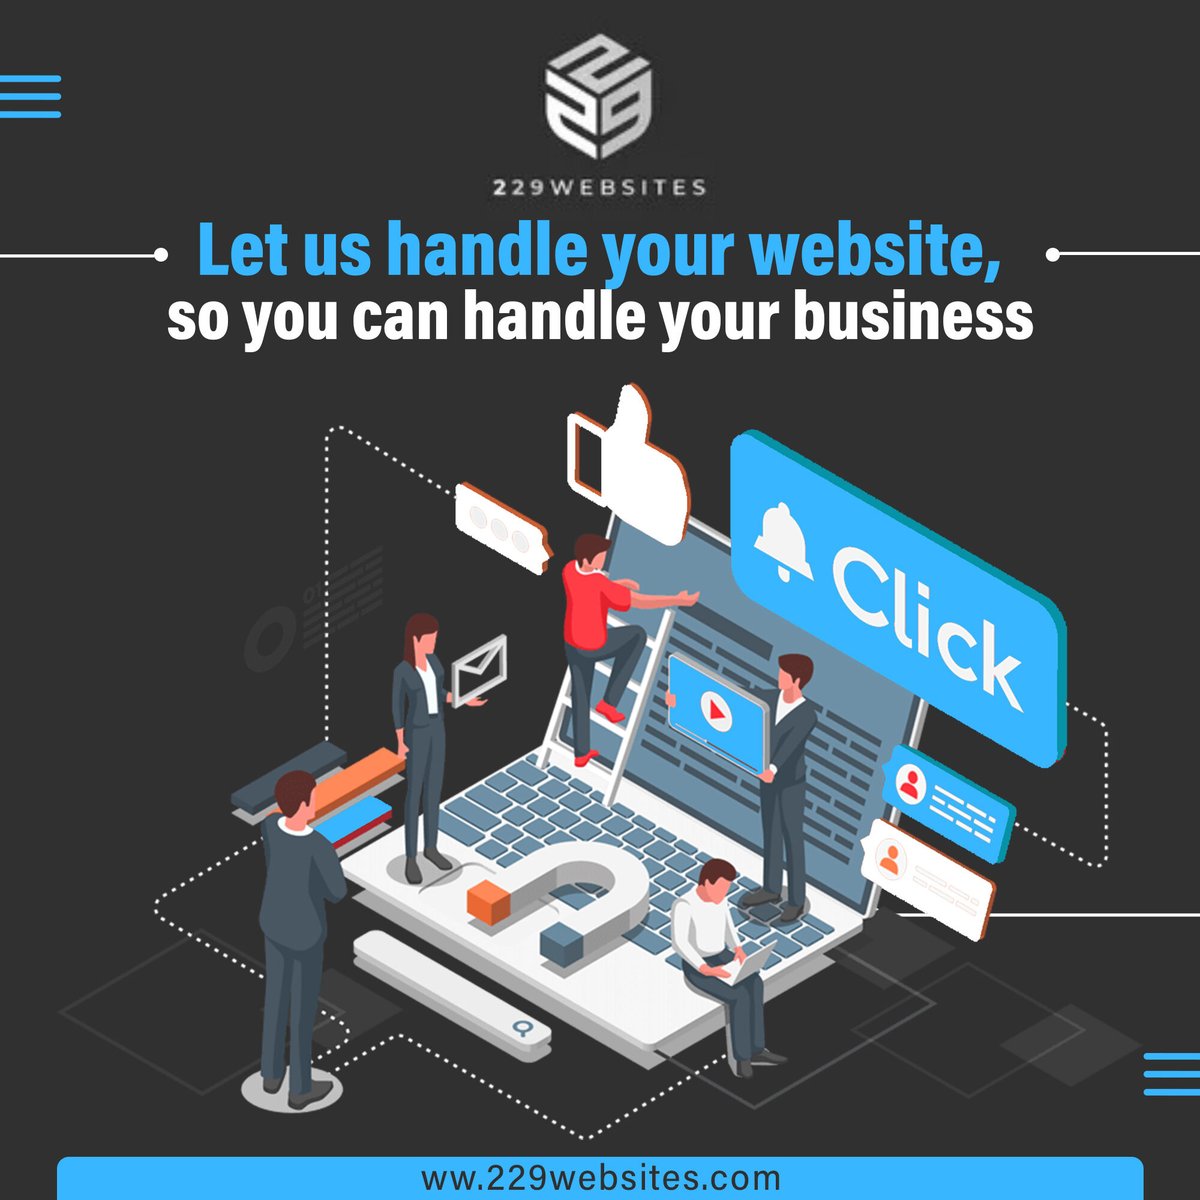 Small business owners, we've got your back! 💪 Let 229Website handle your website so you can focus on what you do best. #VisualAppeal #CustomerAttraction #ProductShowcase #ServicePresentation #BusinessWebsite